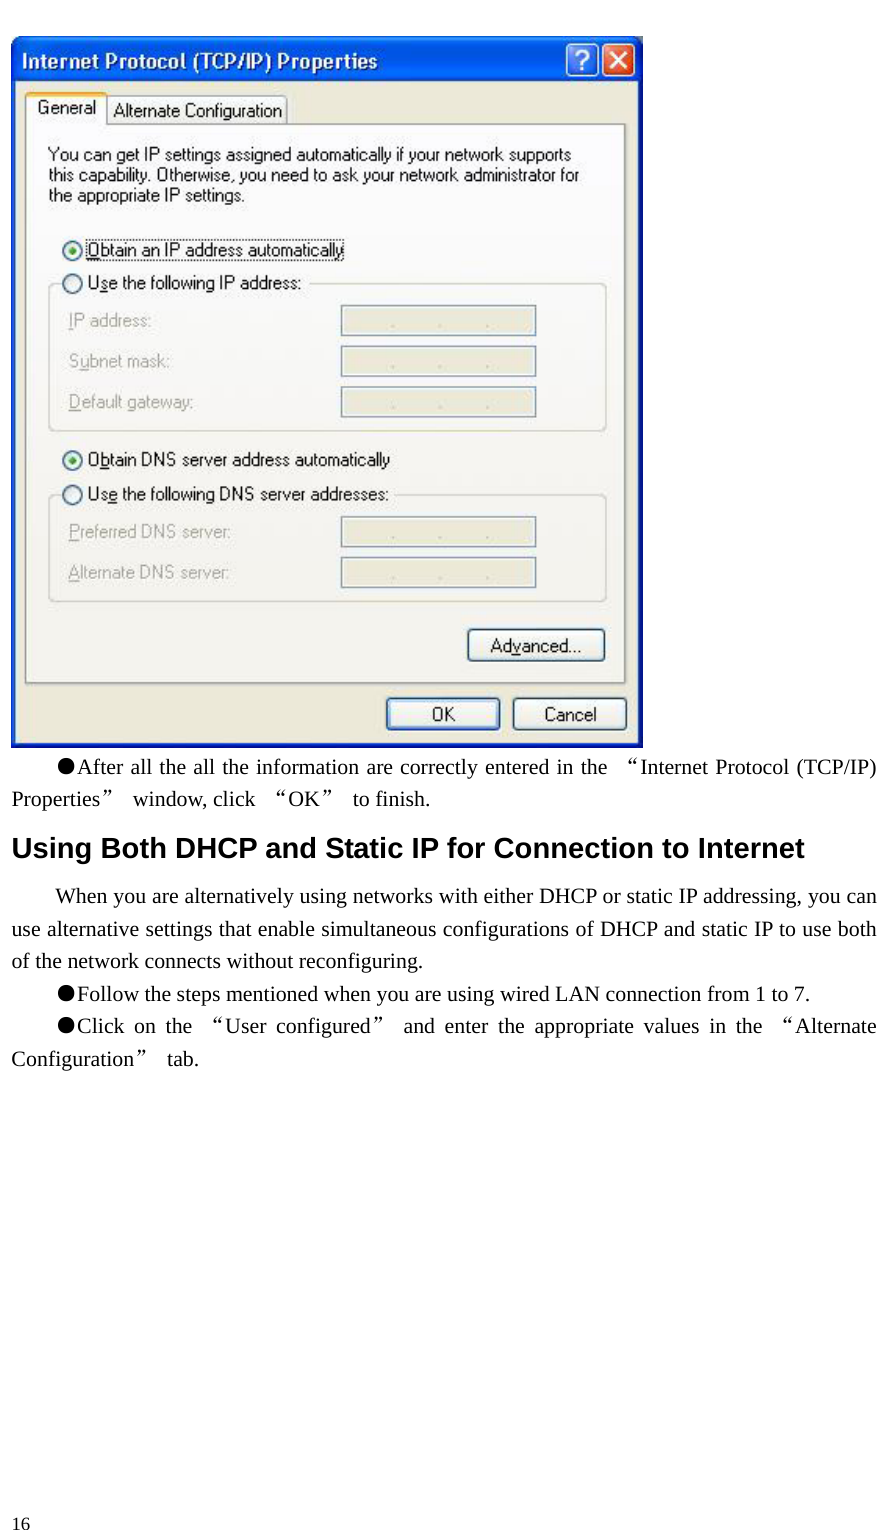   16  ●After all the all the information are correctly entered in the  “Internet Protocol (TCP/IP) Properties” window, click “OK” to finish. Using Both DHCP and Static IP for Connection to Internet When you are alternatively using networks with either DHCP or static IP addressing, you can use alternative settings that enable simultaneous configurations of DHCP and static IP to use both of the network connects without reconfiguring. ●Follow the steps mentioned when you are using wired LAN connection from 1 to 7. ●Click on the “User configured” and enter the appropriate values in the “Alternate Configuration” tab. 